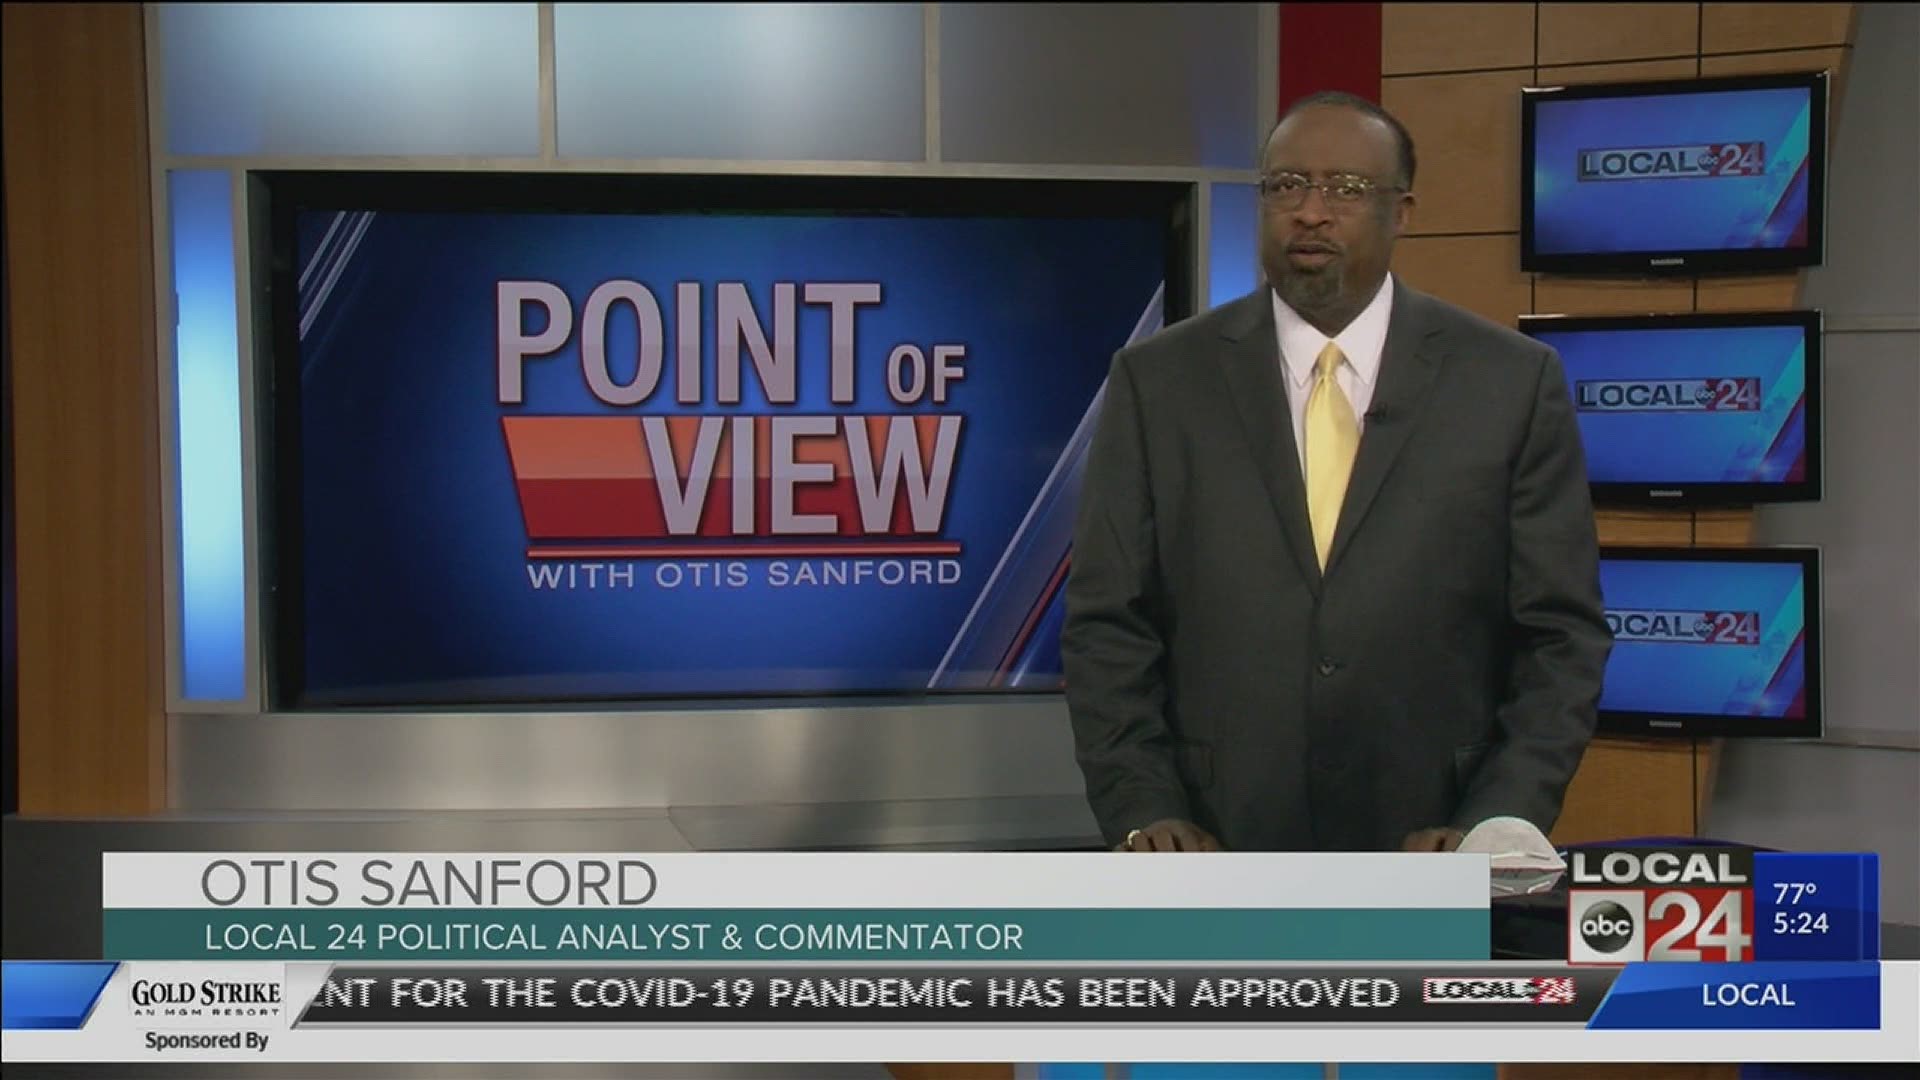 Local 24 News political analyst and commentator Otis Sanford shares his point of view on following COVID-19 guidelines.